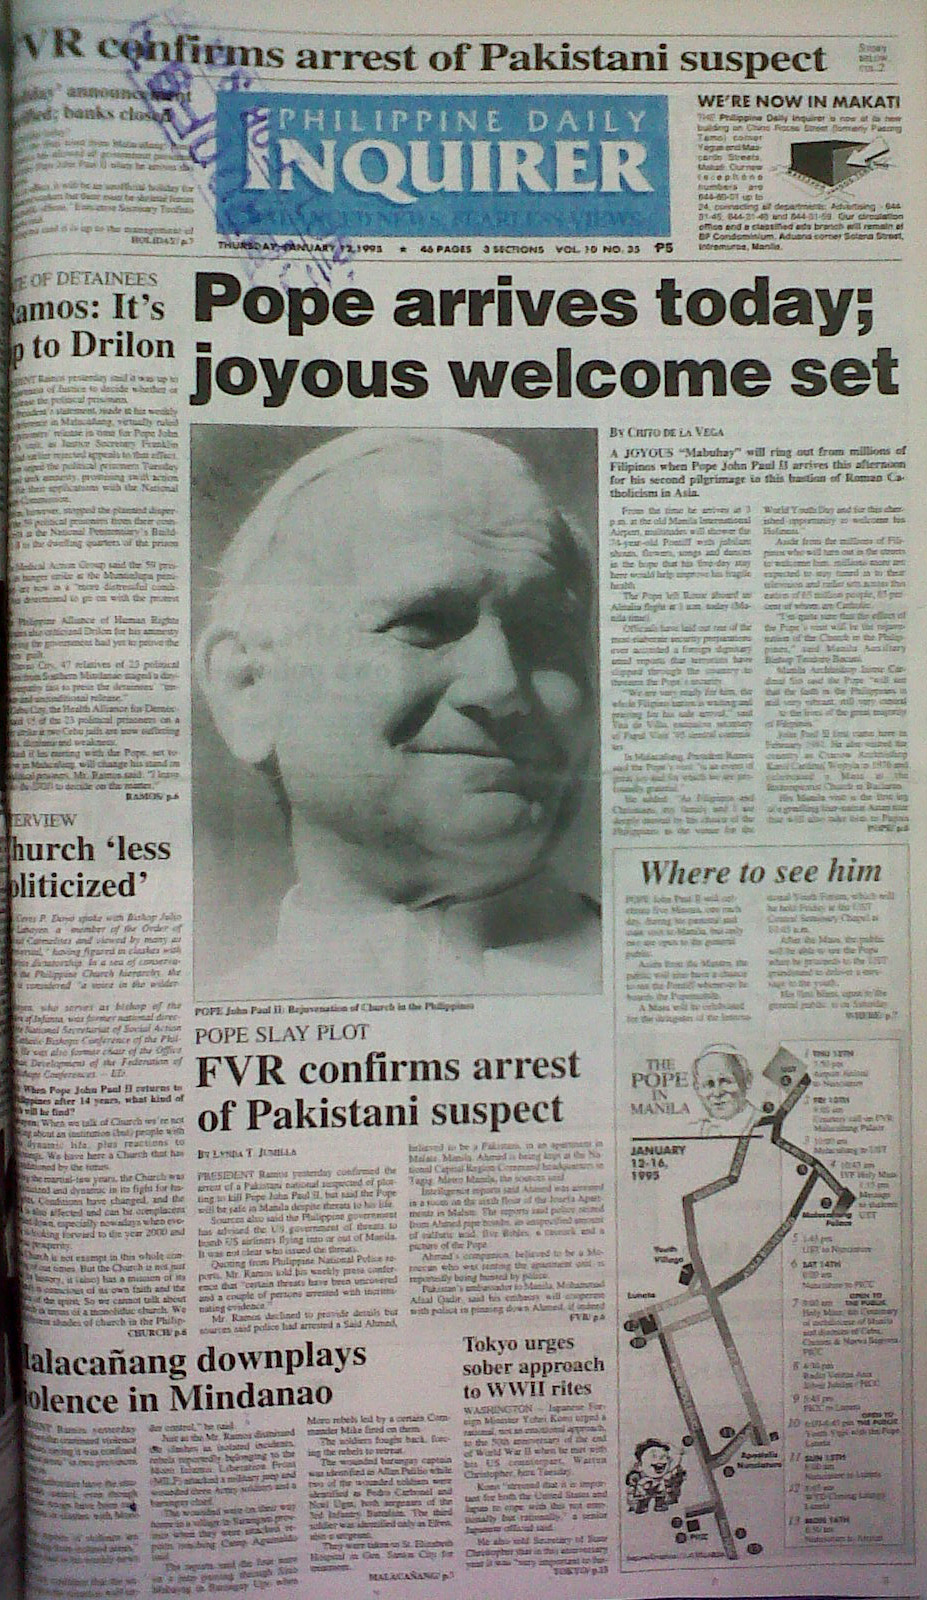 Jan 12, 1995 Philippine Daily Inquirer frontpage Pope John Paul II for World Youth Day